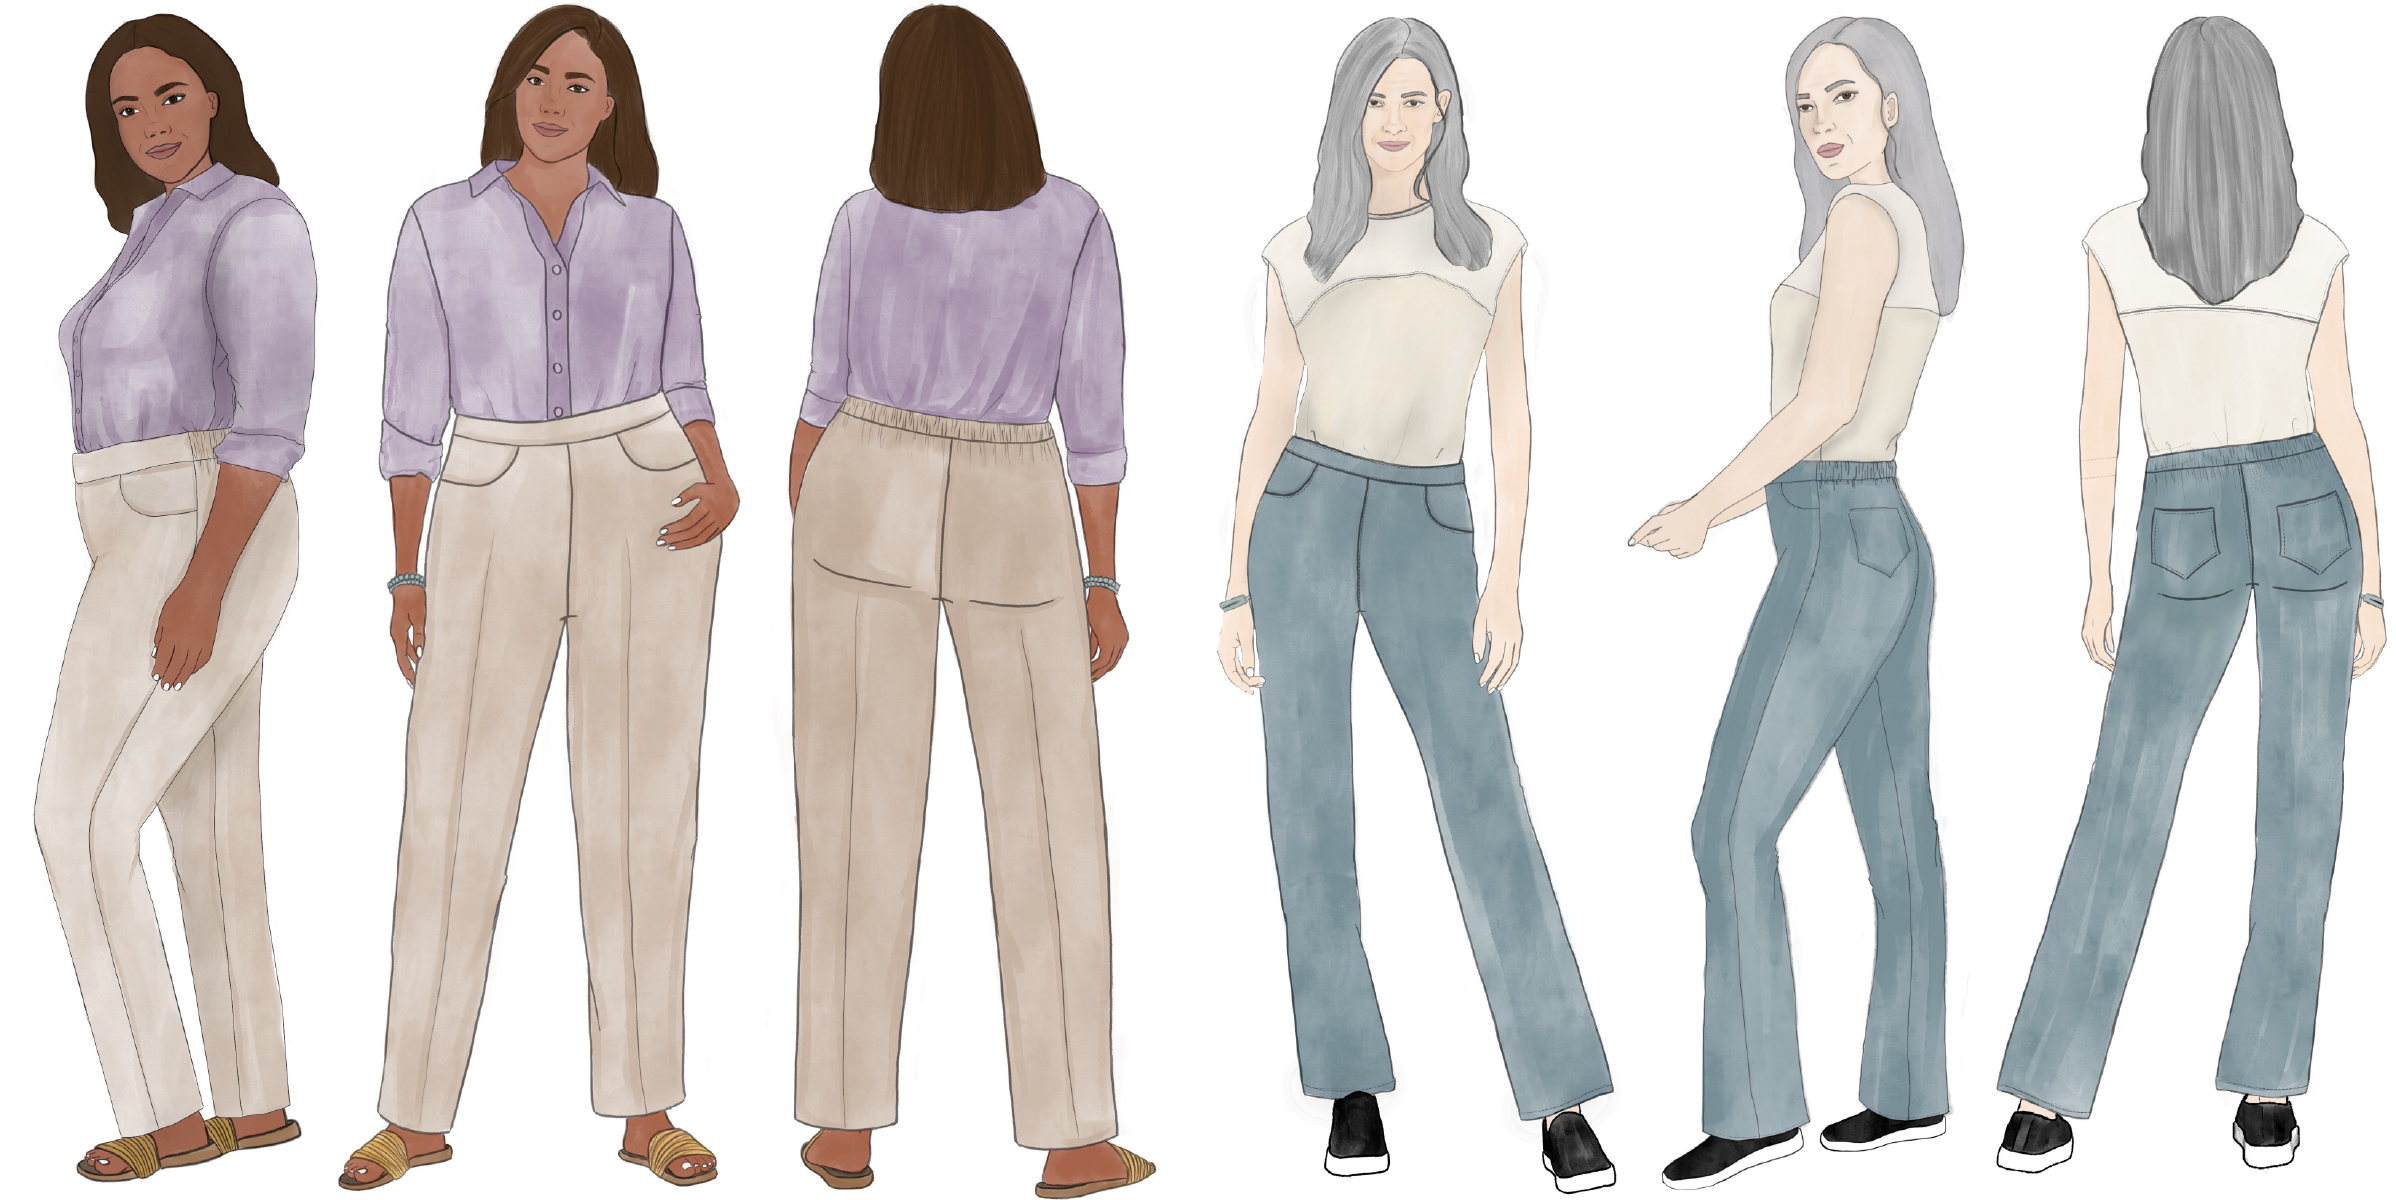 View A of the Secret Jeans Trousers on a larger-sized model. The trousers have jeans-style front pockets with an ankle-length hem. The waistband sits at the natural waist with back elastic. The illustration shows the model wearing the trousers with a button-down shirt tucked in and flat sandals.